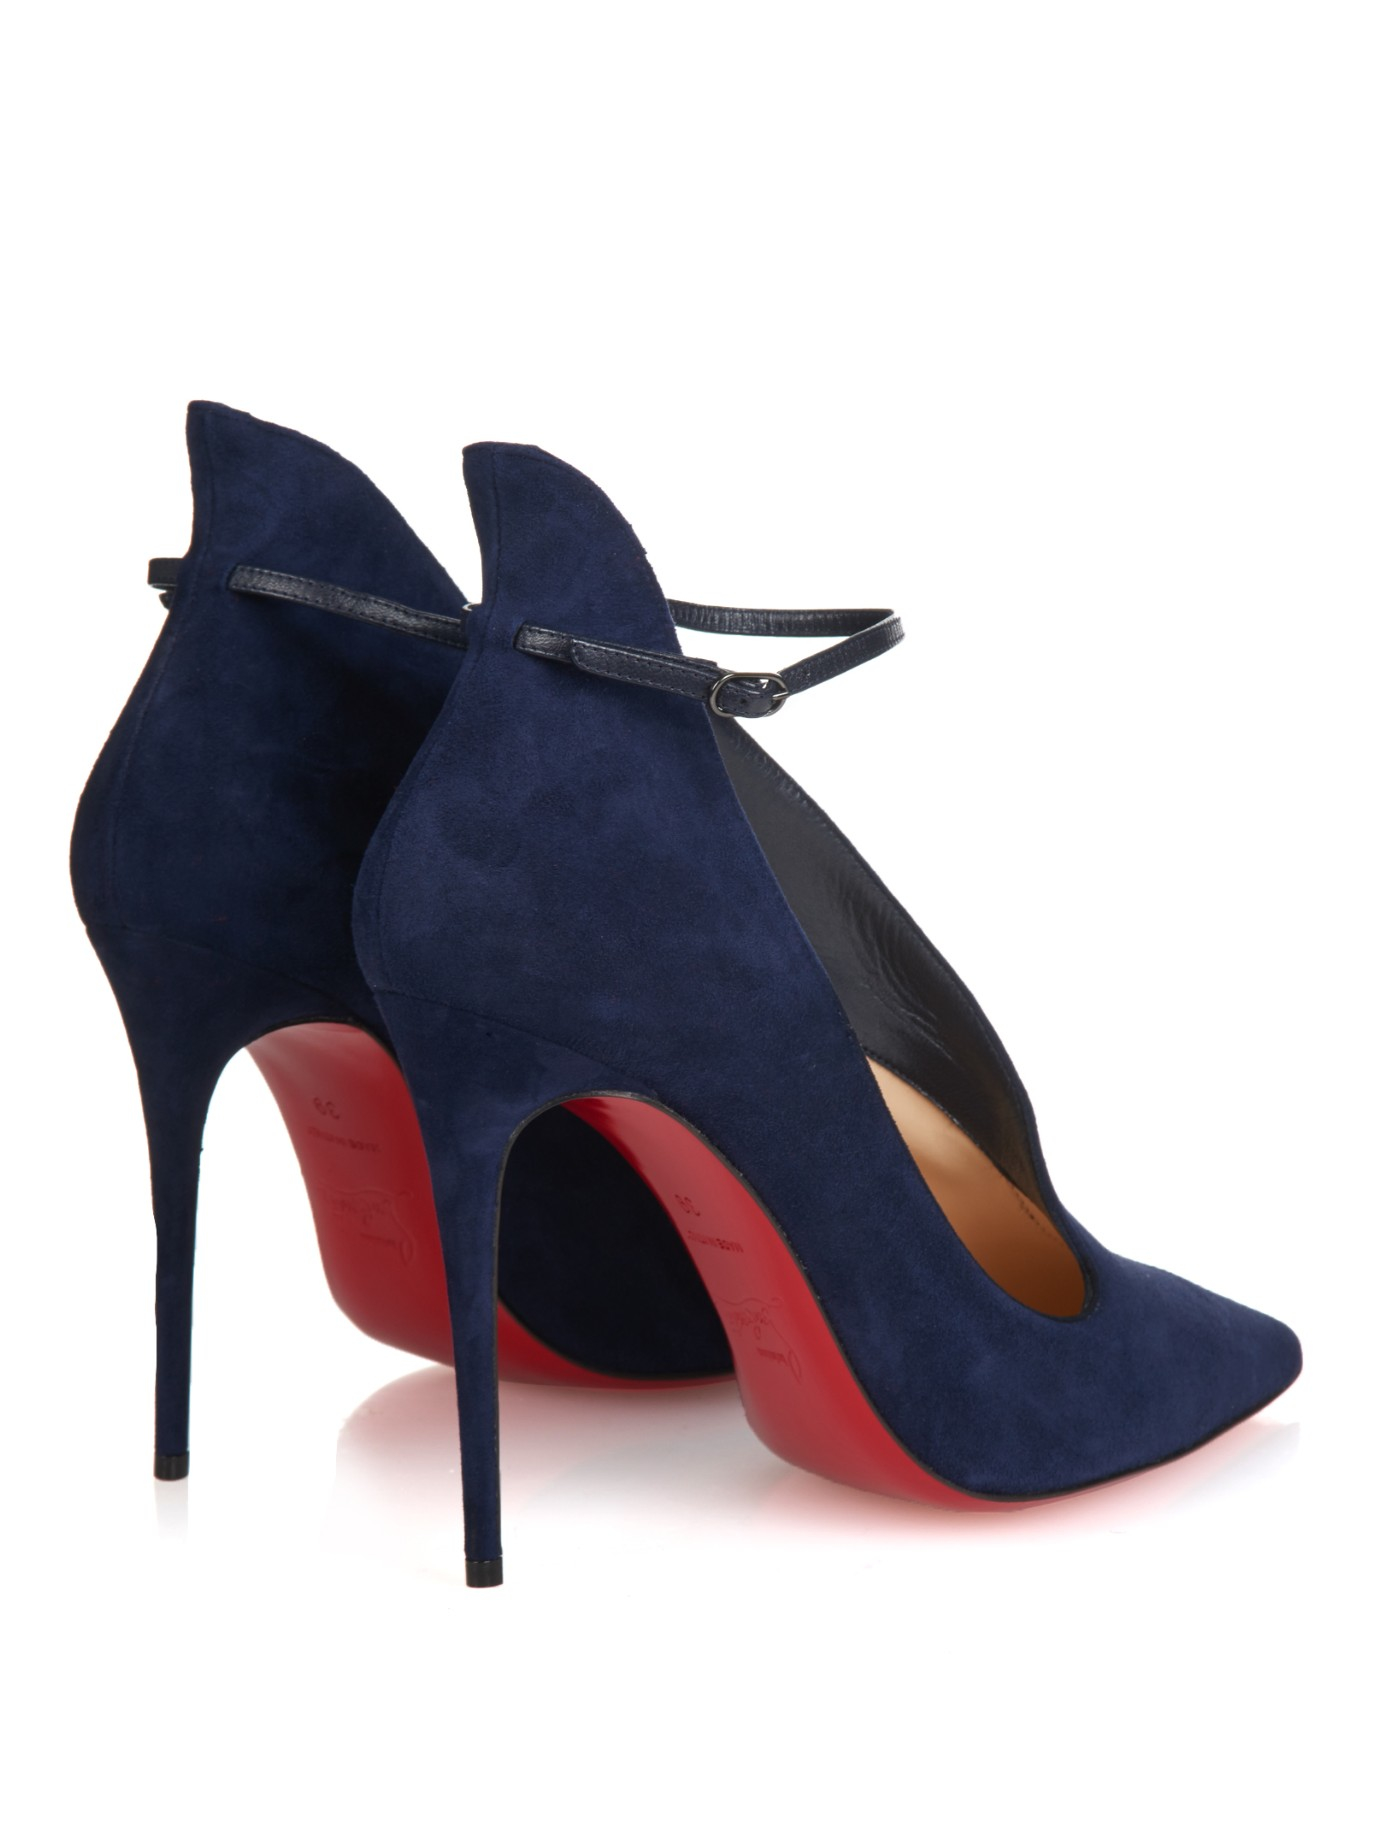 Christian Louboutin Vampydoly Suede Pumps in Blue Lyst